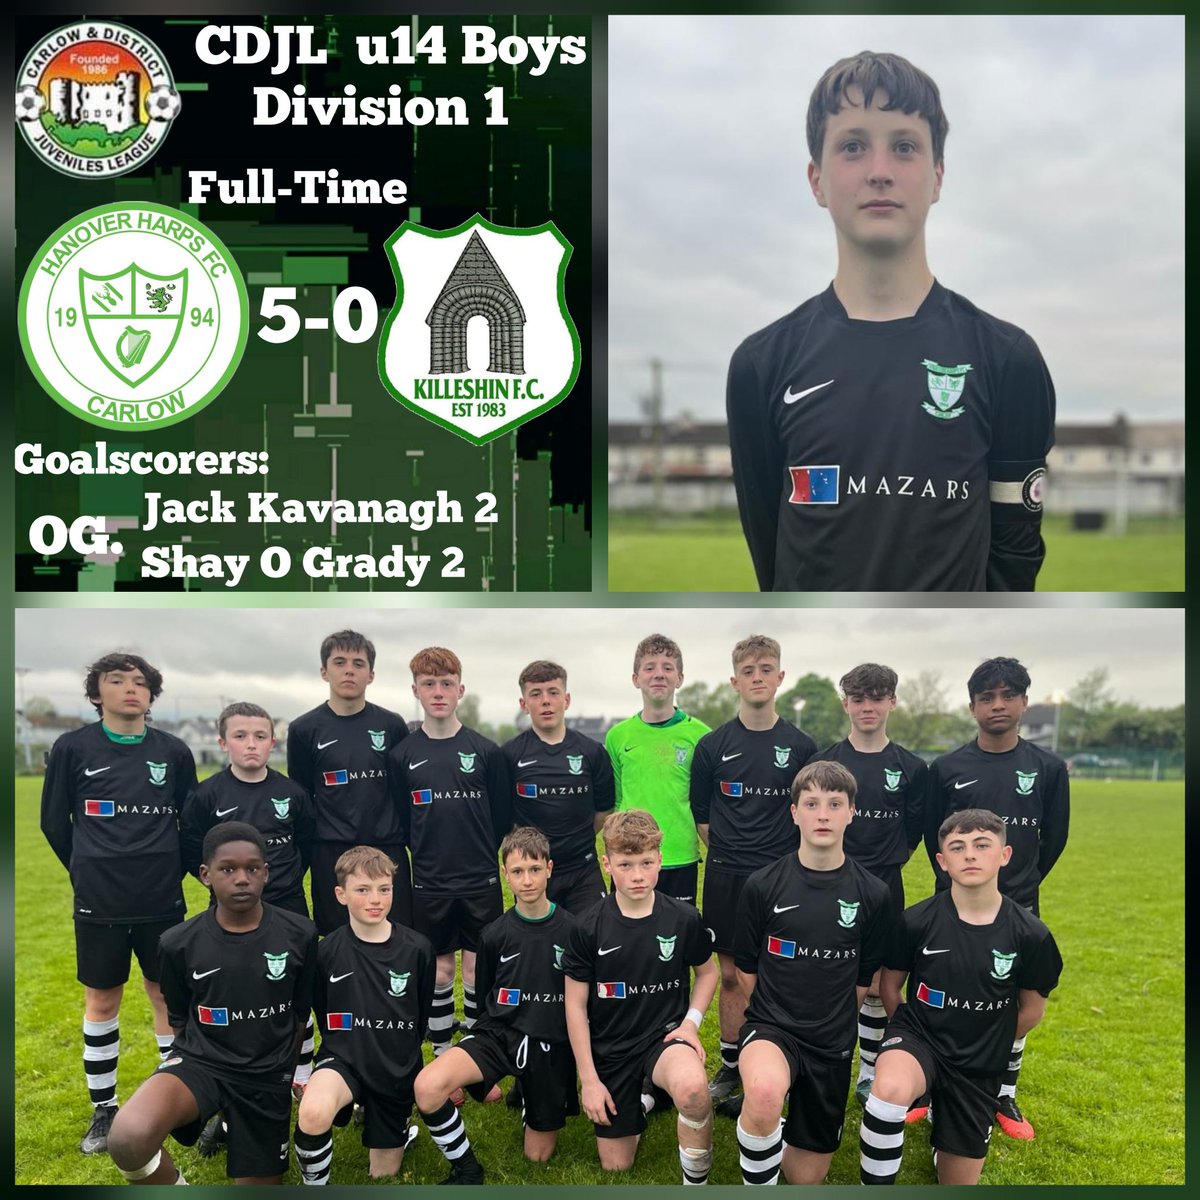 Hanover Harps u14 Div1 side overcame a tough Killeshin side tonight, Nathan Walsh was our @HeadInTheGameIE captain. @carlowjuvsoccer @FAICarlow @ActiveCarlow @Pres_Carlow @GCCCW1 @tyndall_college @cbscarlow @GrassrootsTTB @nuamanufacture @Carlow_Co_Co